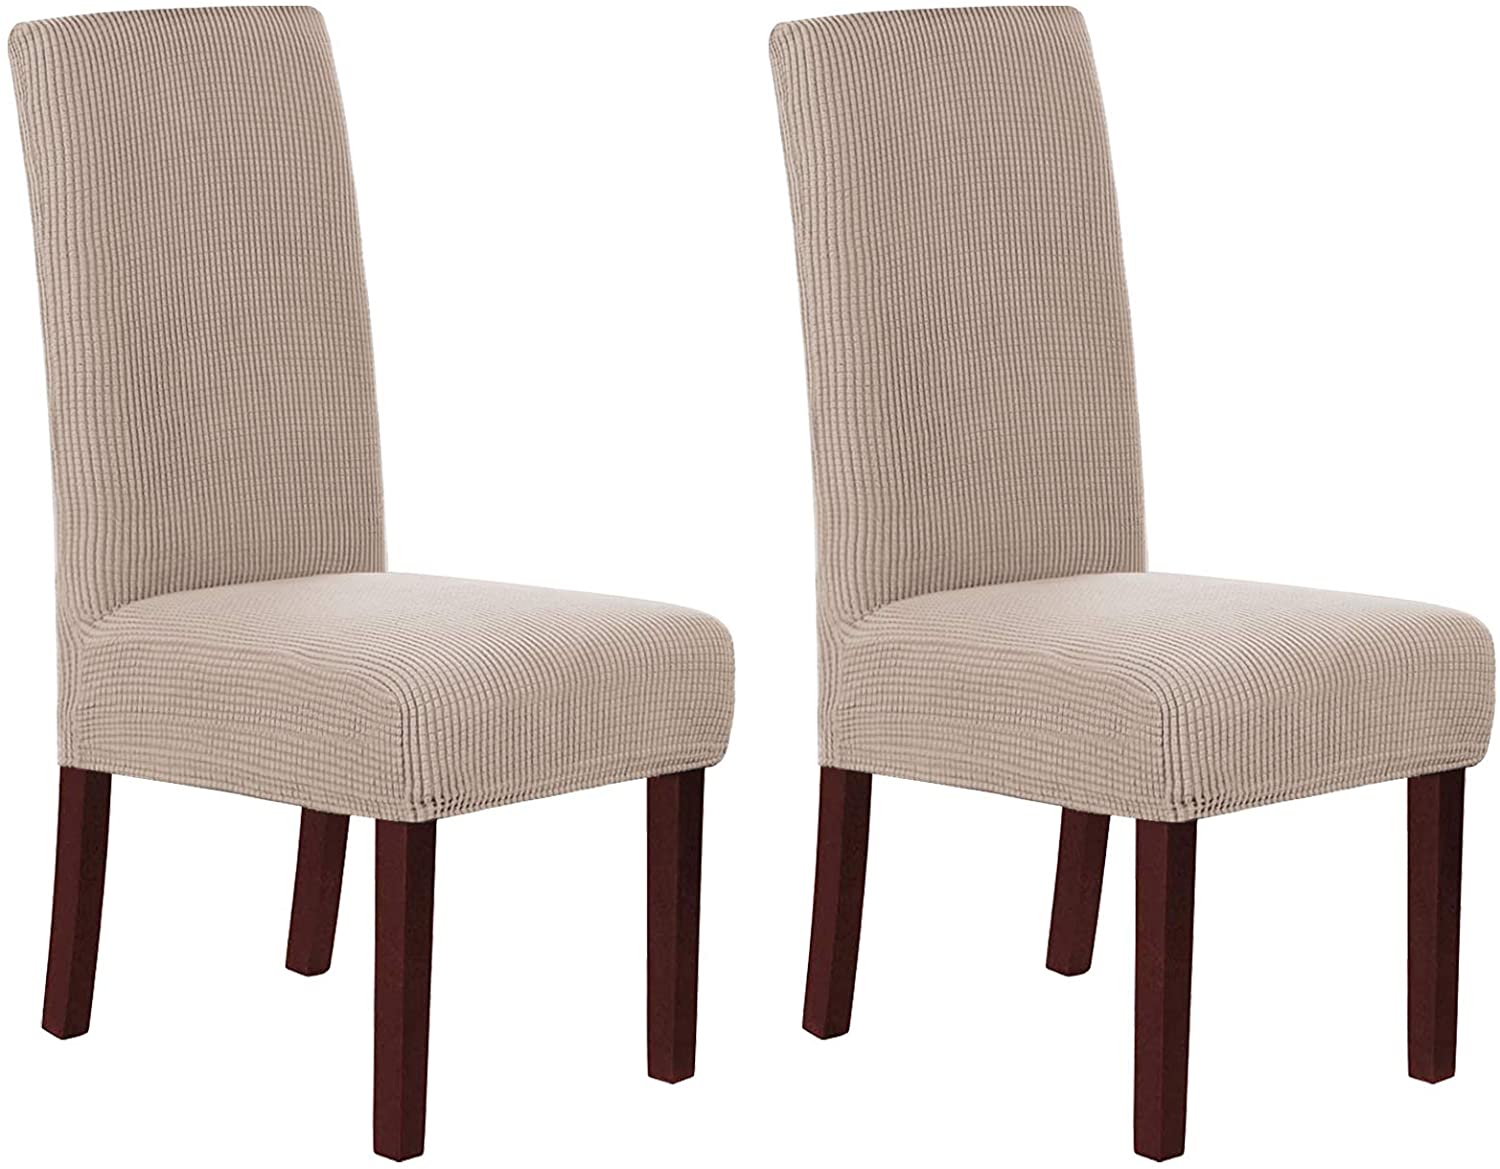 Dining Chair Cover, Form Fitting Soft Jacquard Geometric Parson Chair Slipcover (Set of 2) - Linen Universe Co.